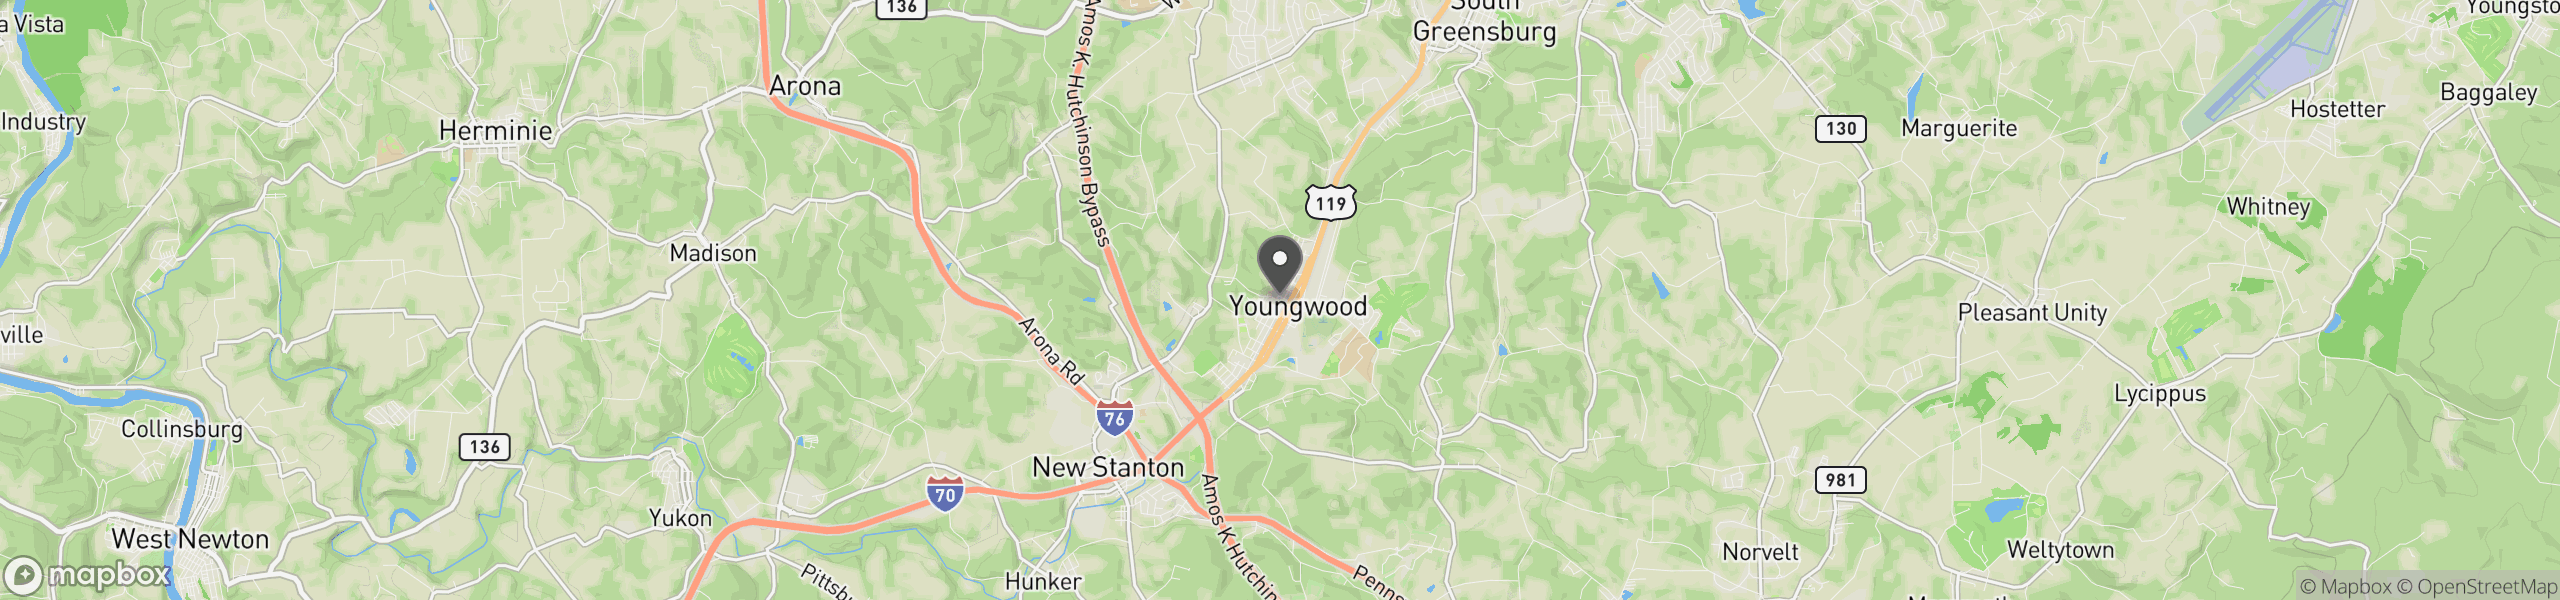 Youngwood, PA